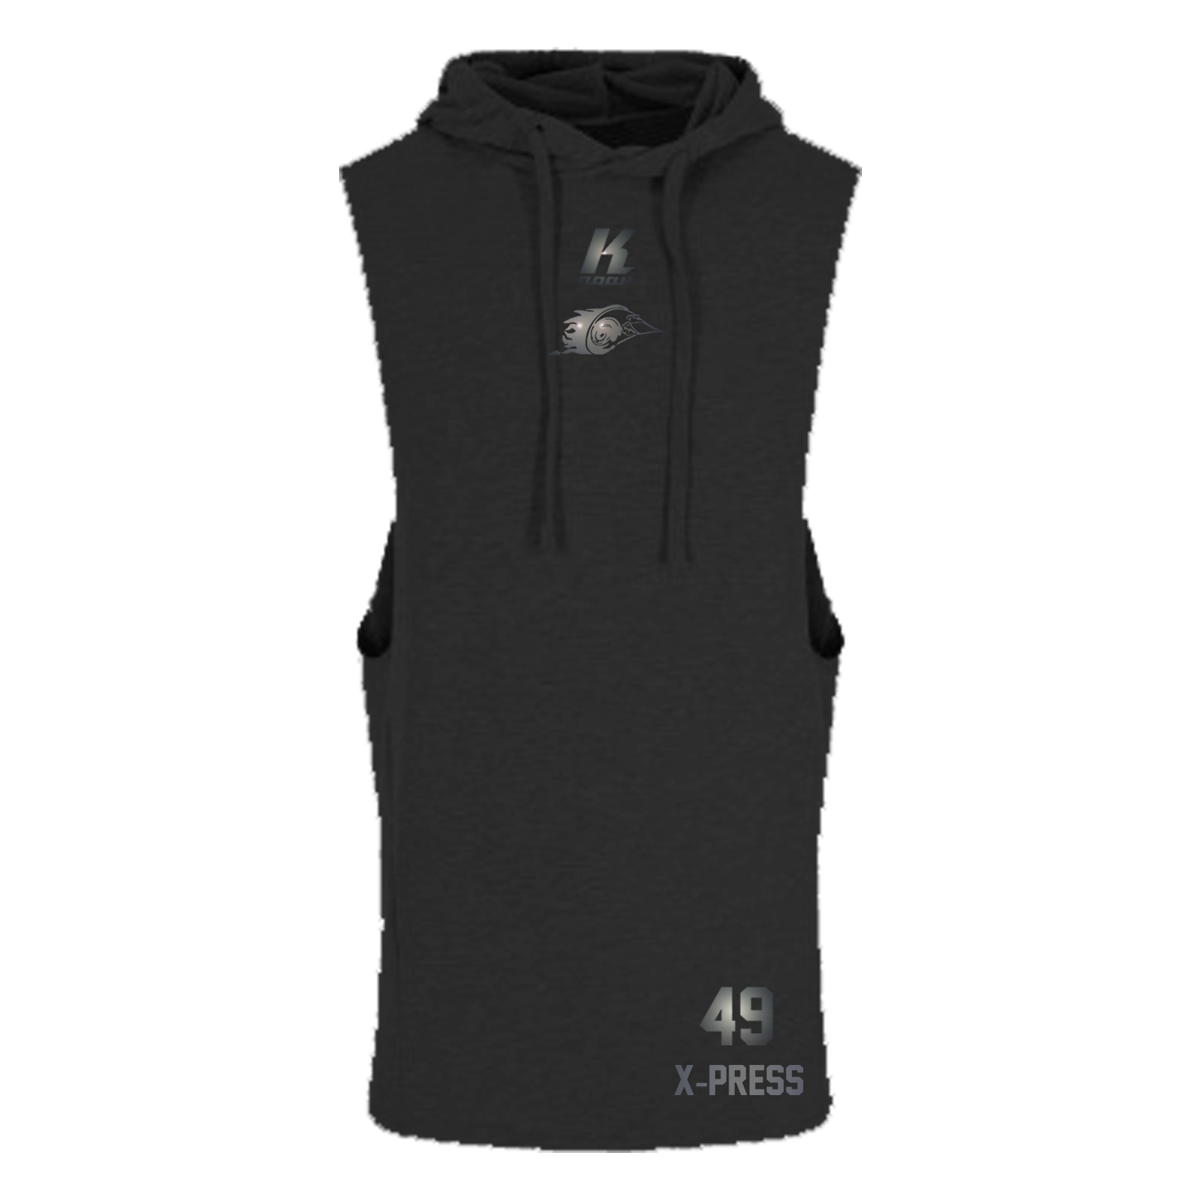 X-Press "Blackline" Sleeveless Muscle Hoodie JC053 with Playernumber or Initials